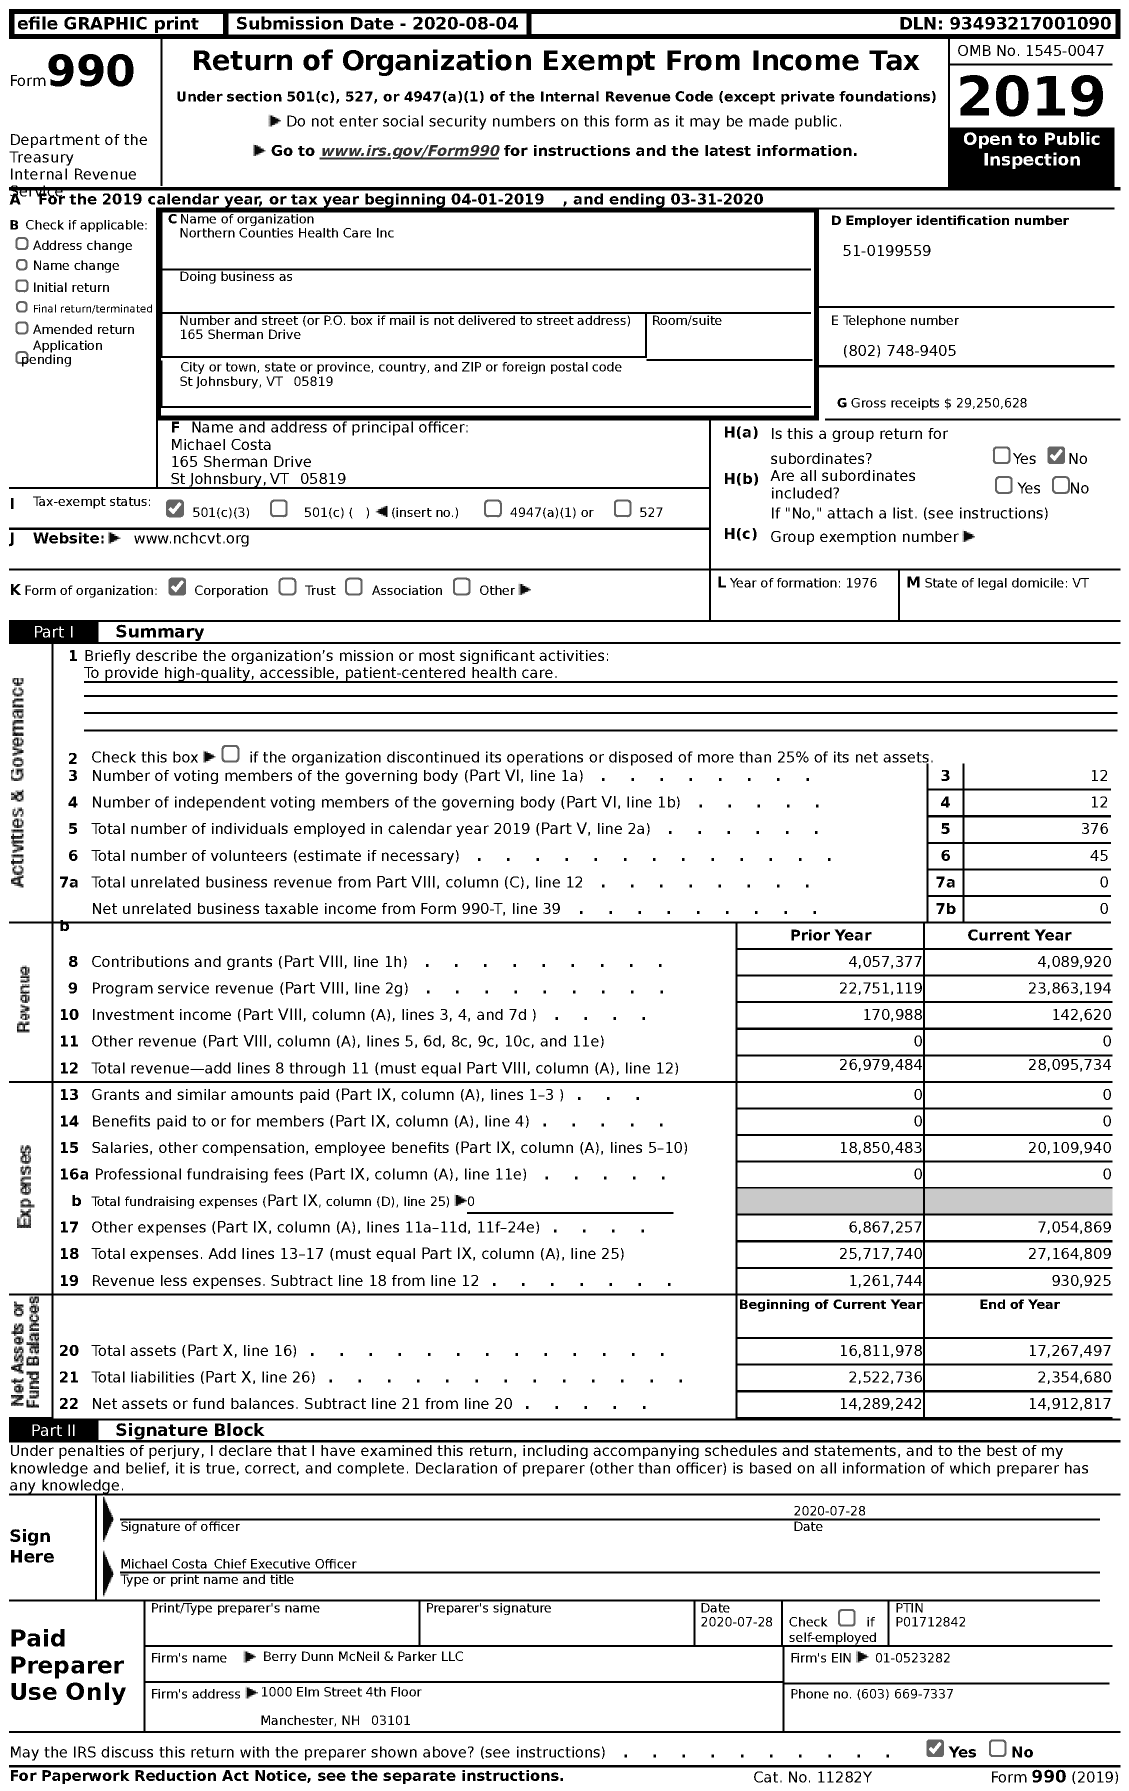 Image of first page of 2019 Form 990 for Northern Counties Health Care (NCHC)